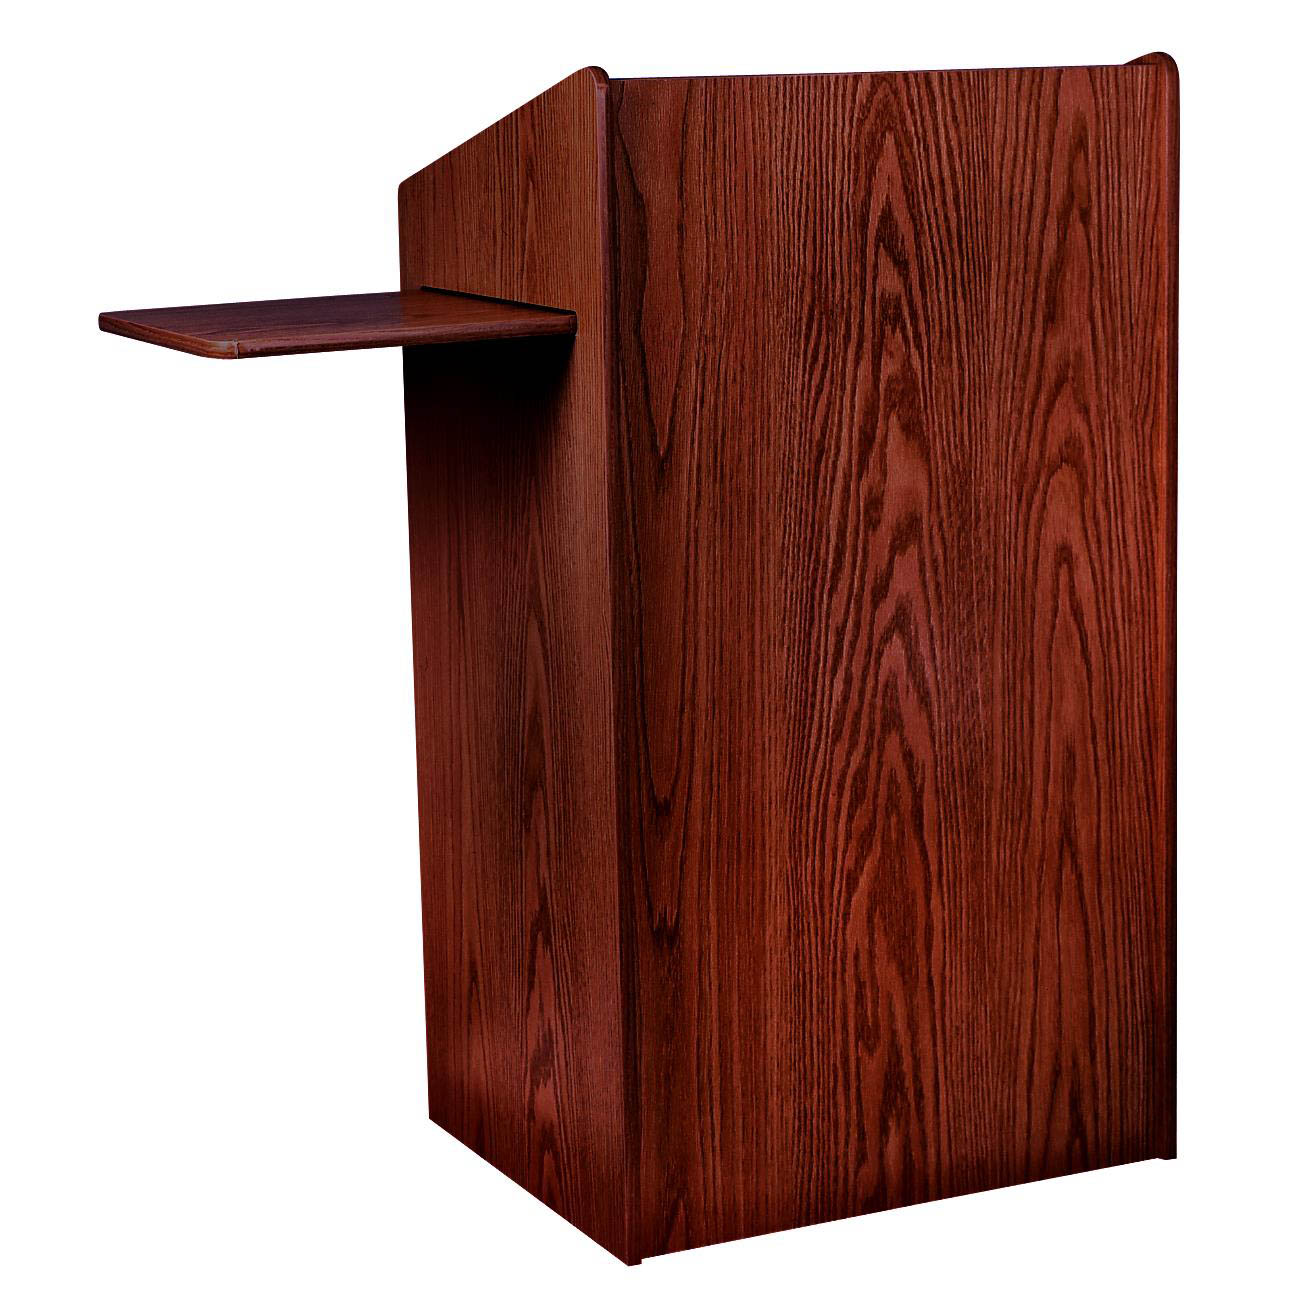 Aristocrat Full Floor Lectern/Podium with 2 Built-in and 1 Slide-Out Side Shelf in Mahogany - 600MY